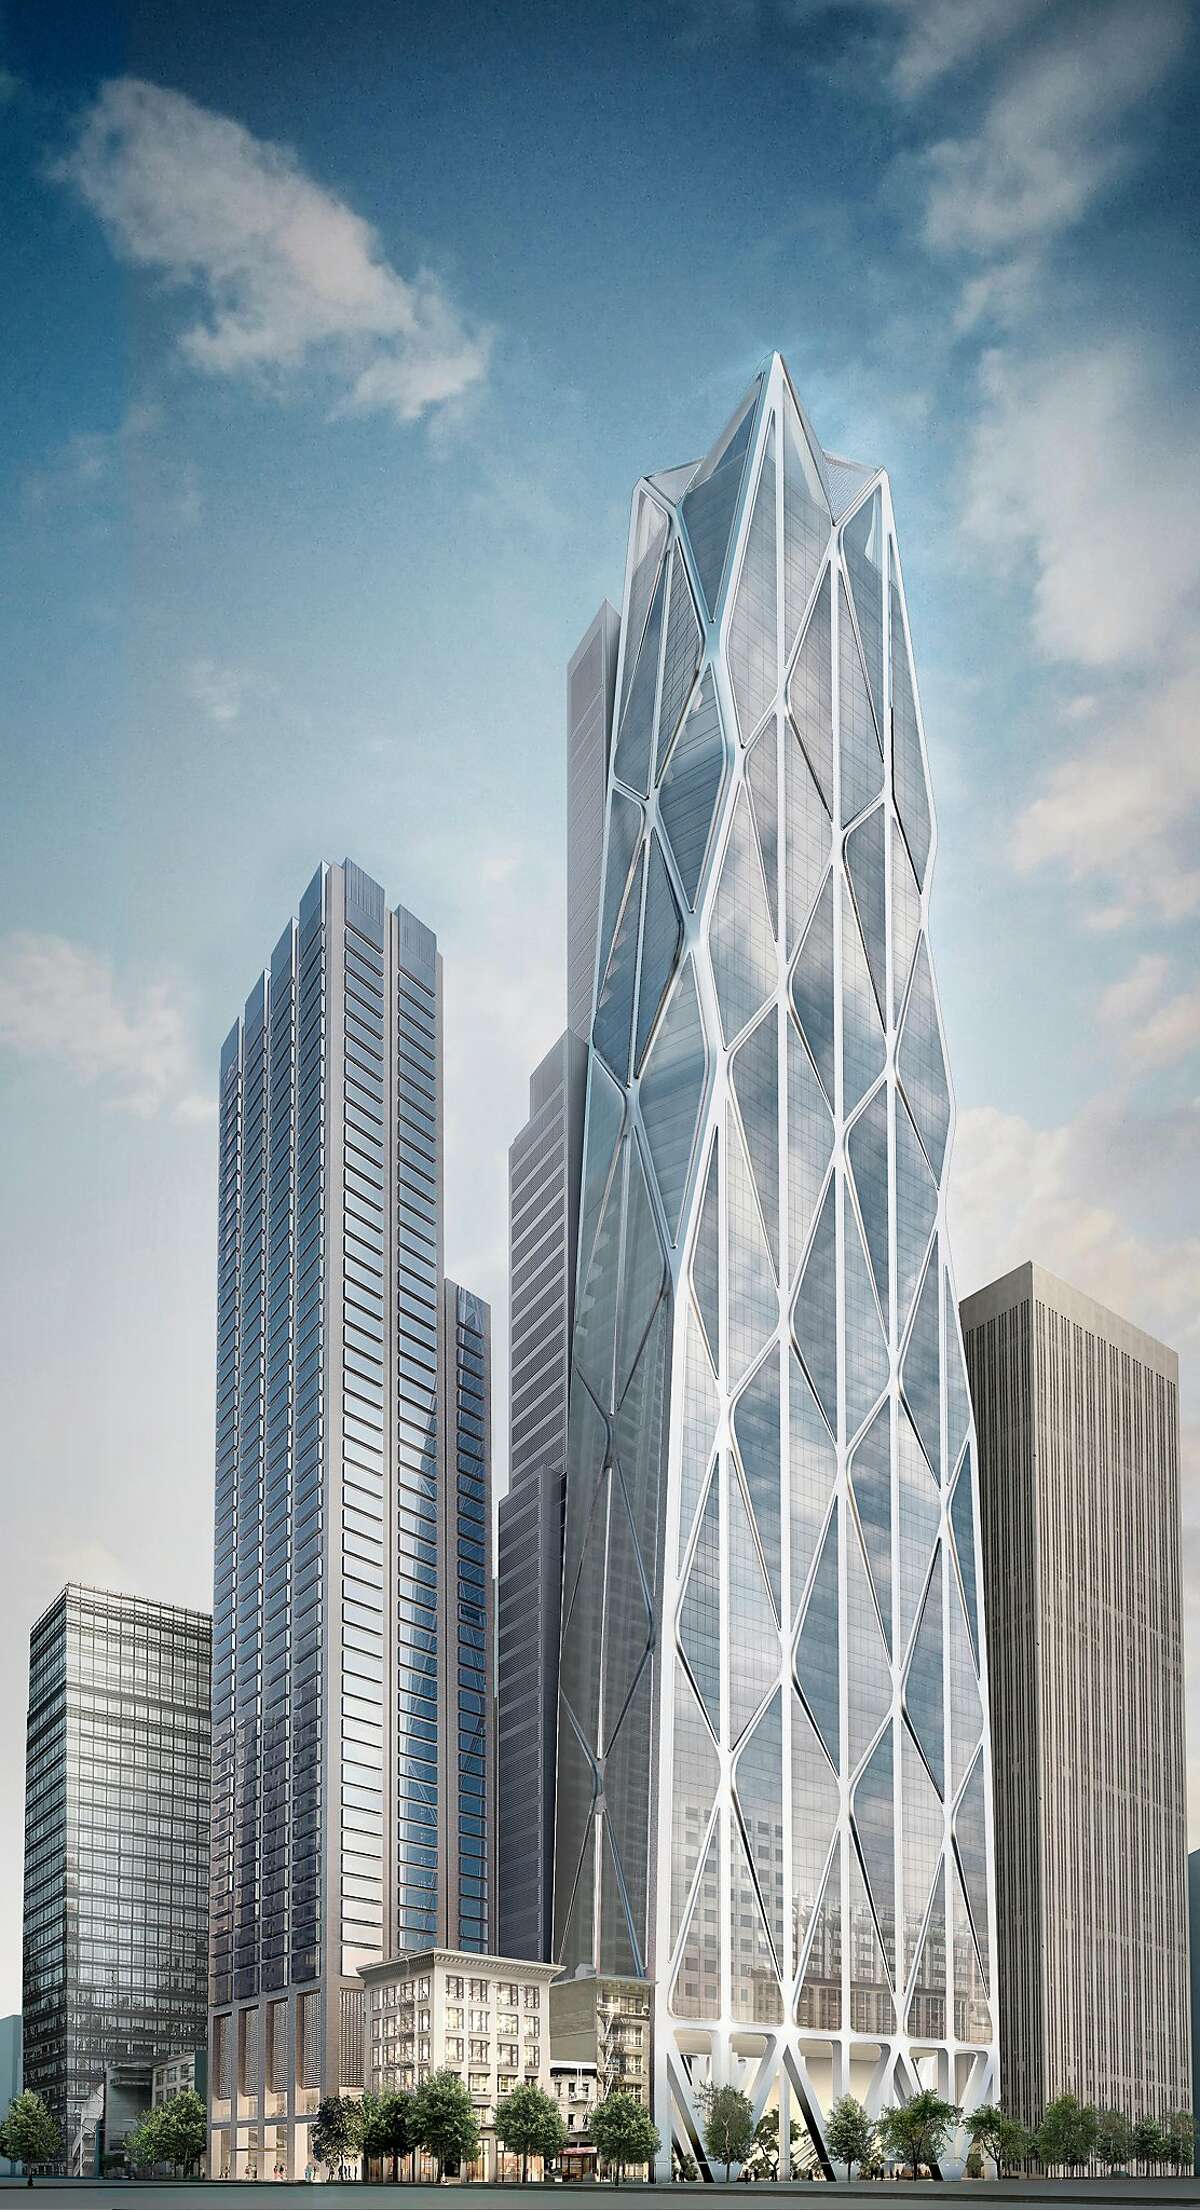 Oceanwide Center, designed by Foster + Partners with Heller Manus Architects, will include a 910-foot tower on First Street and a 625-foot high-rise on Mission Street. The complex will include housing, offices, a hotel and a public plaza. The official groundbreaking is Dec. 8, 2016 and the buildings are scheduled to open to the public by 2021.